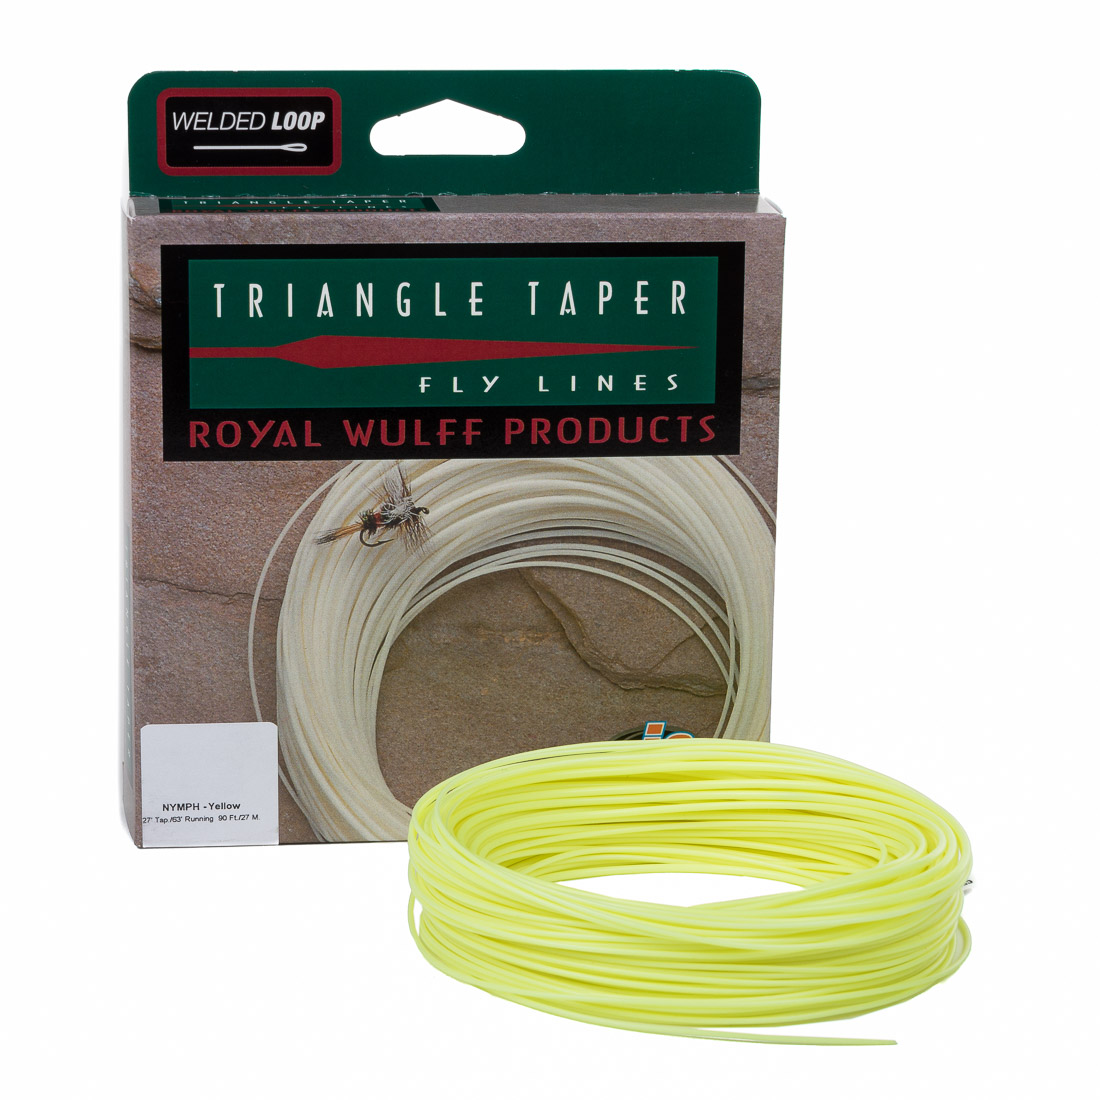 Lee Wulff Triangle Taper Nymph Indicator J3 Fly Line Floating, WF -  Floating, Single-handed, Fly Lines